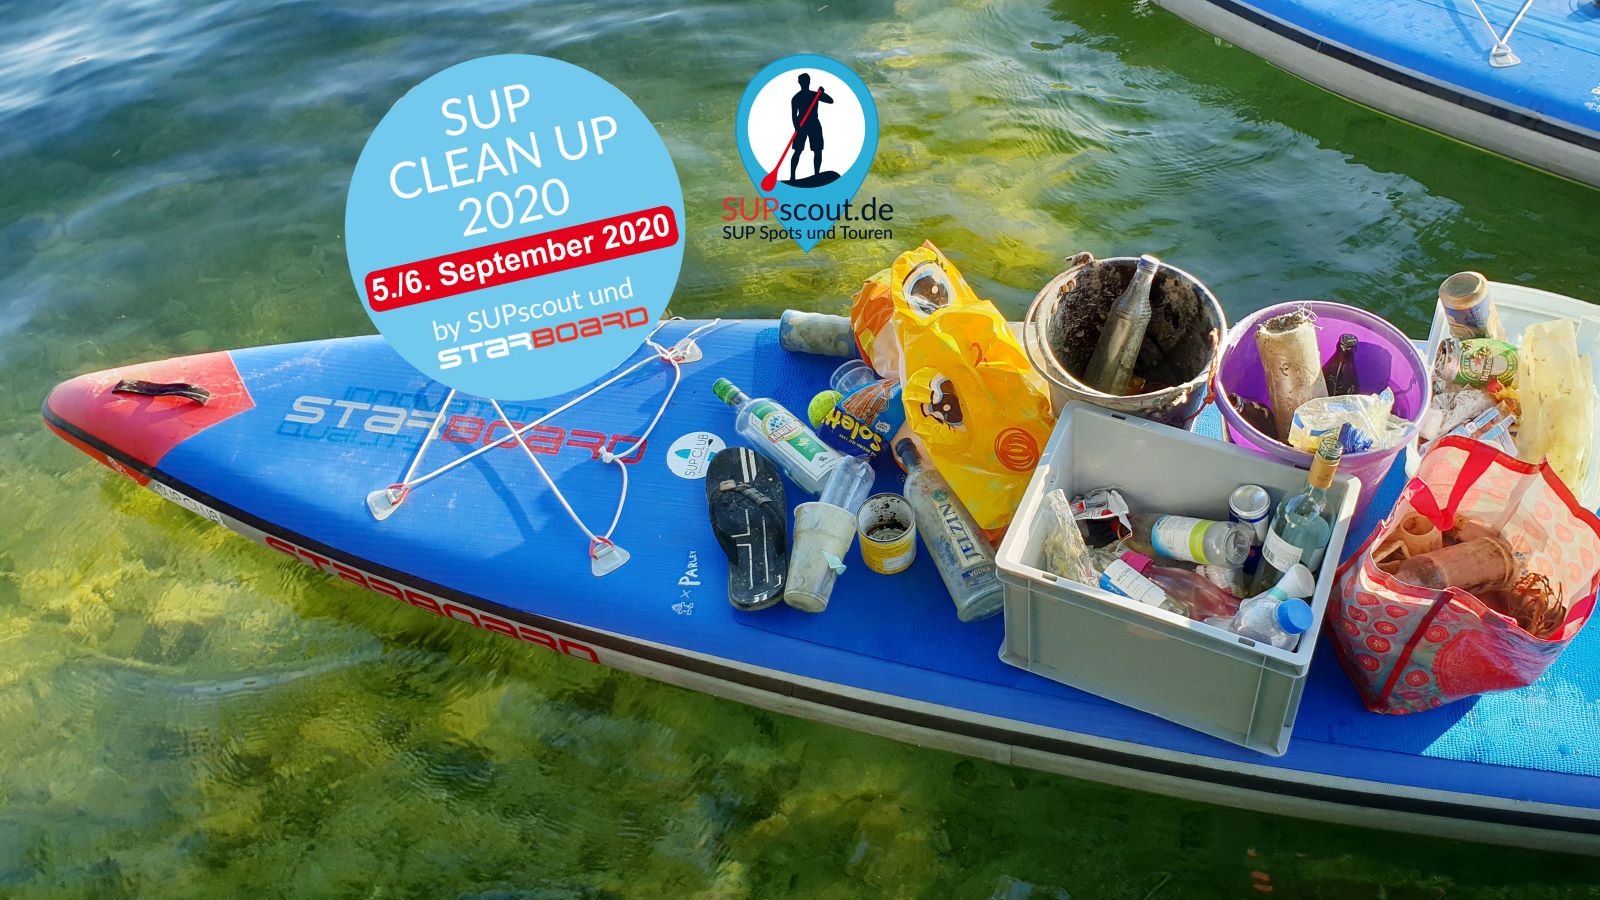 2020 SUP Clean up